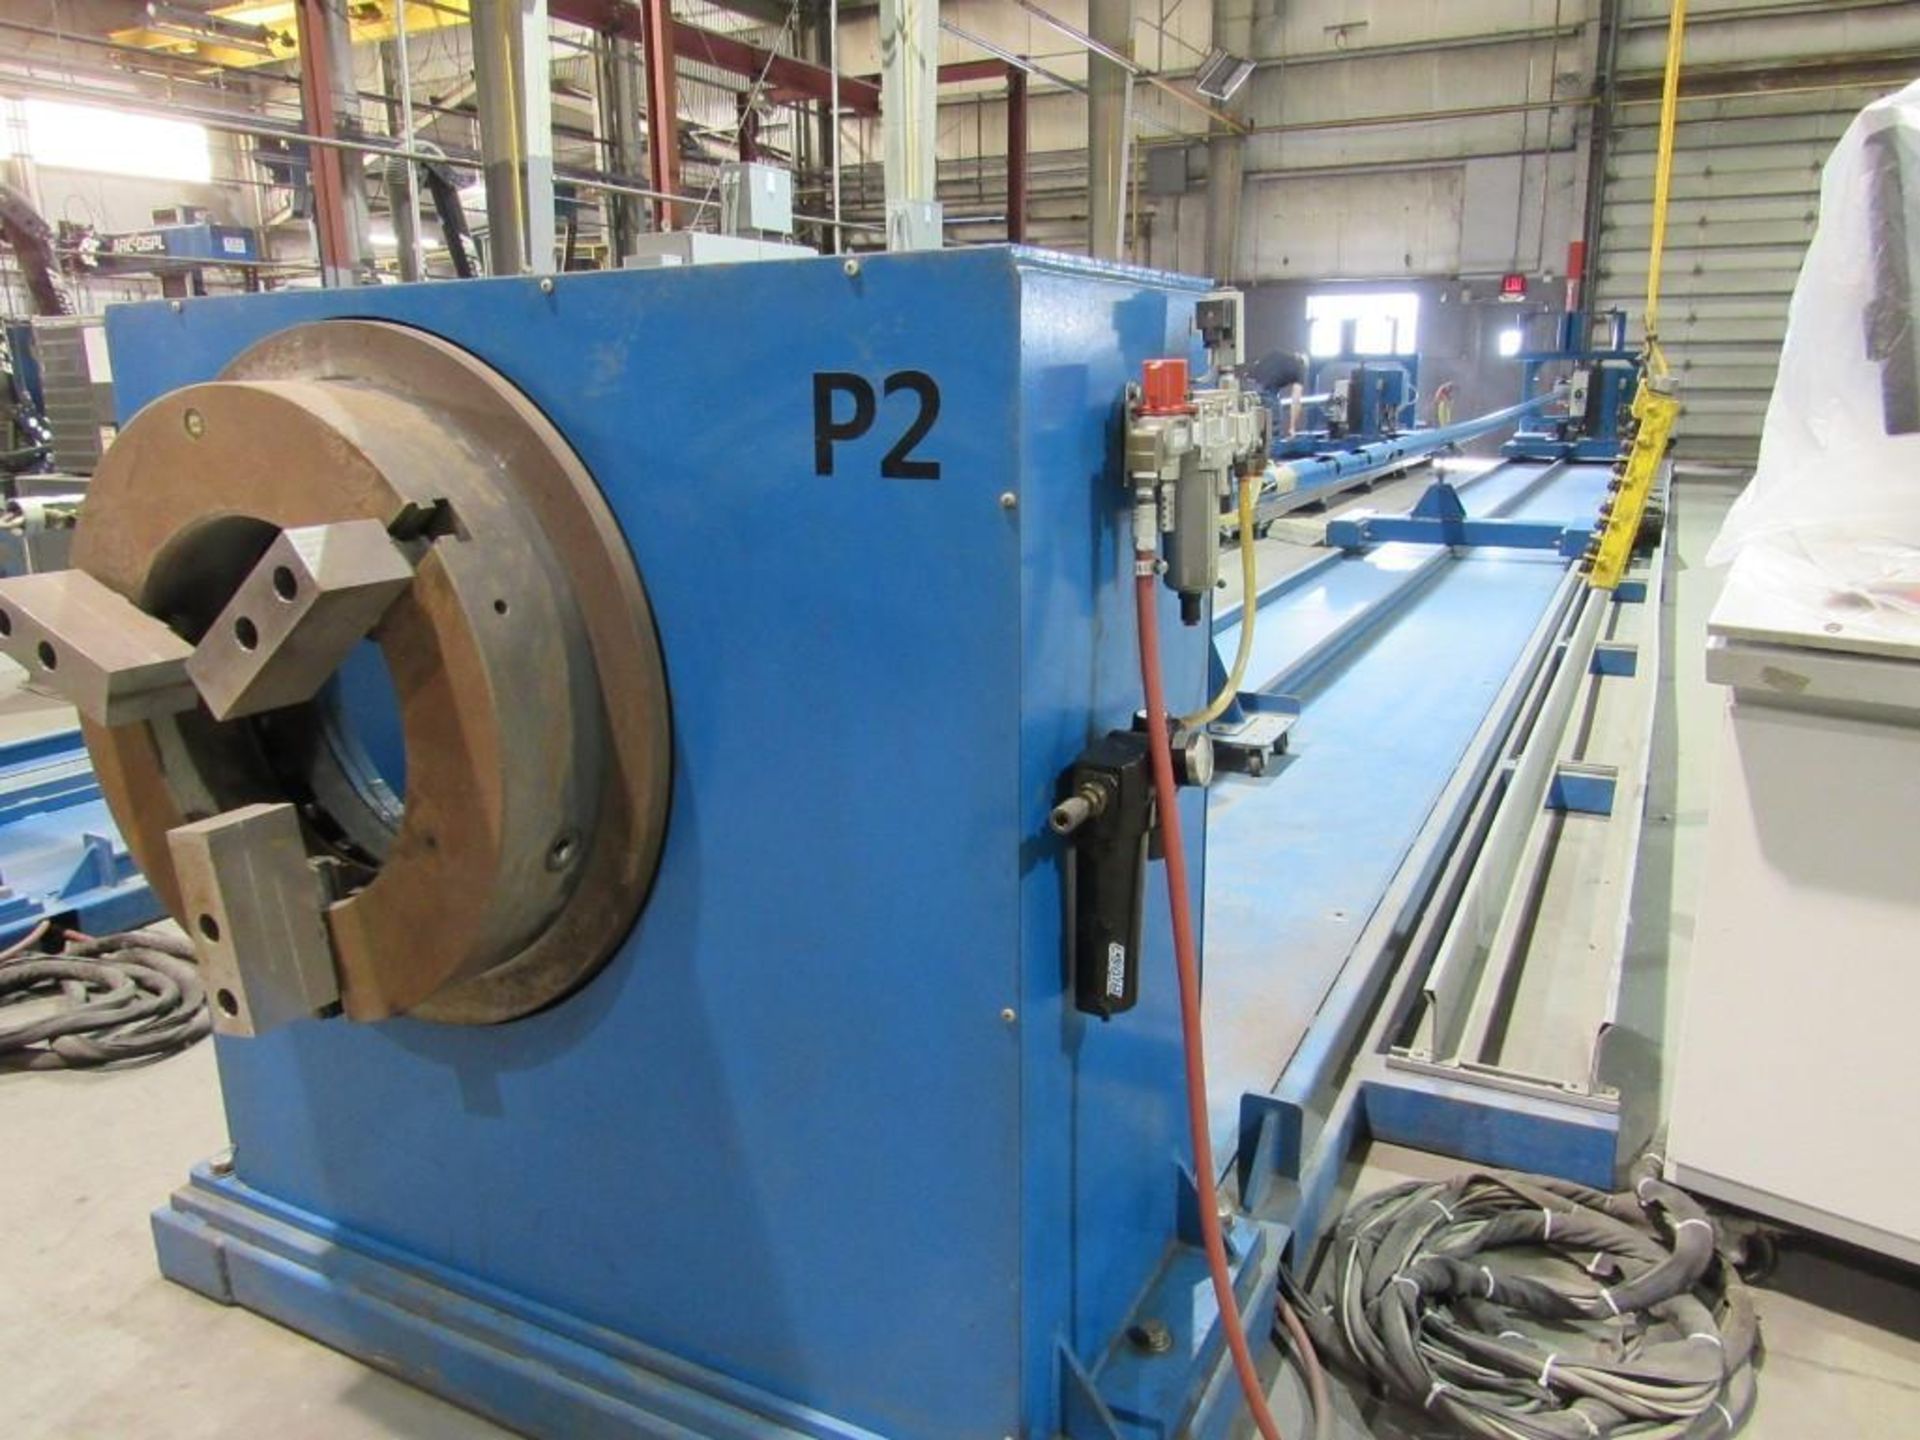 42' Tripulse Dual Hot Wire GTAW Pipe Cladding System, New Jan. 2015, S/N 1545-21026 - Image 2 of 17